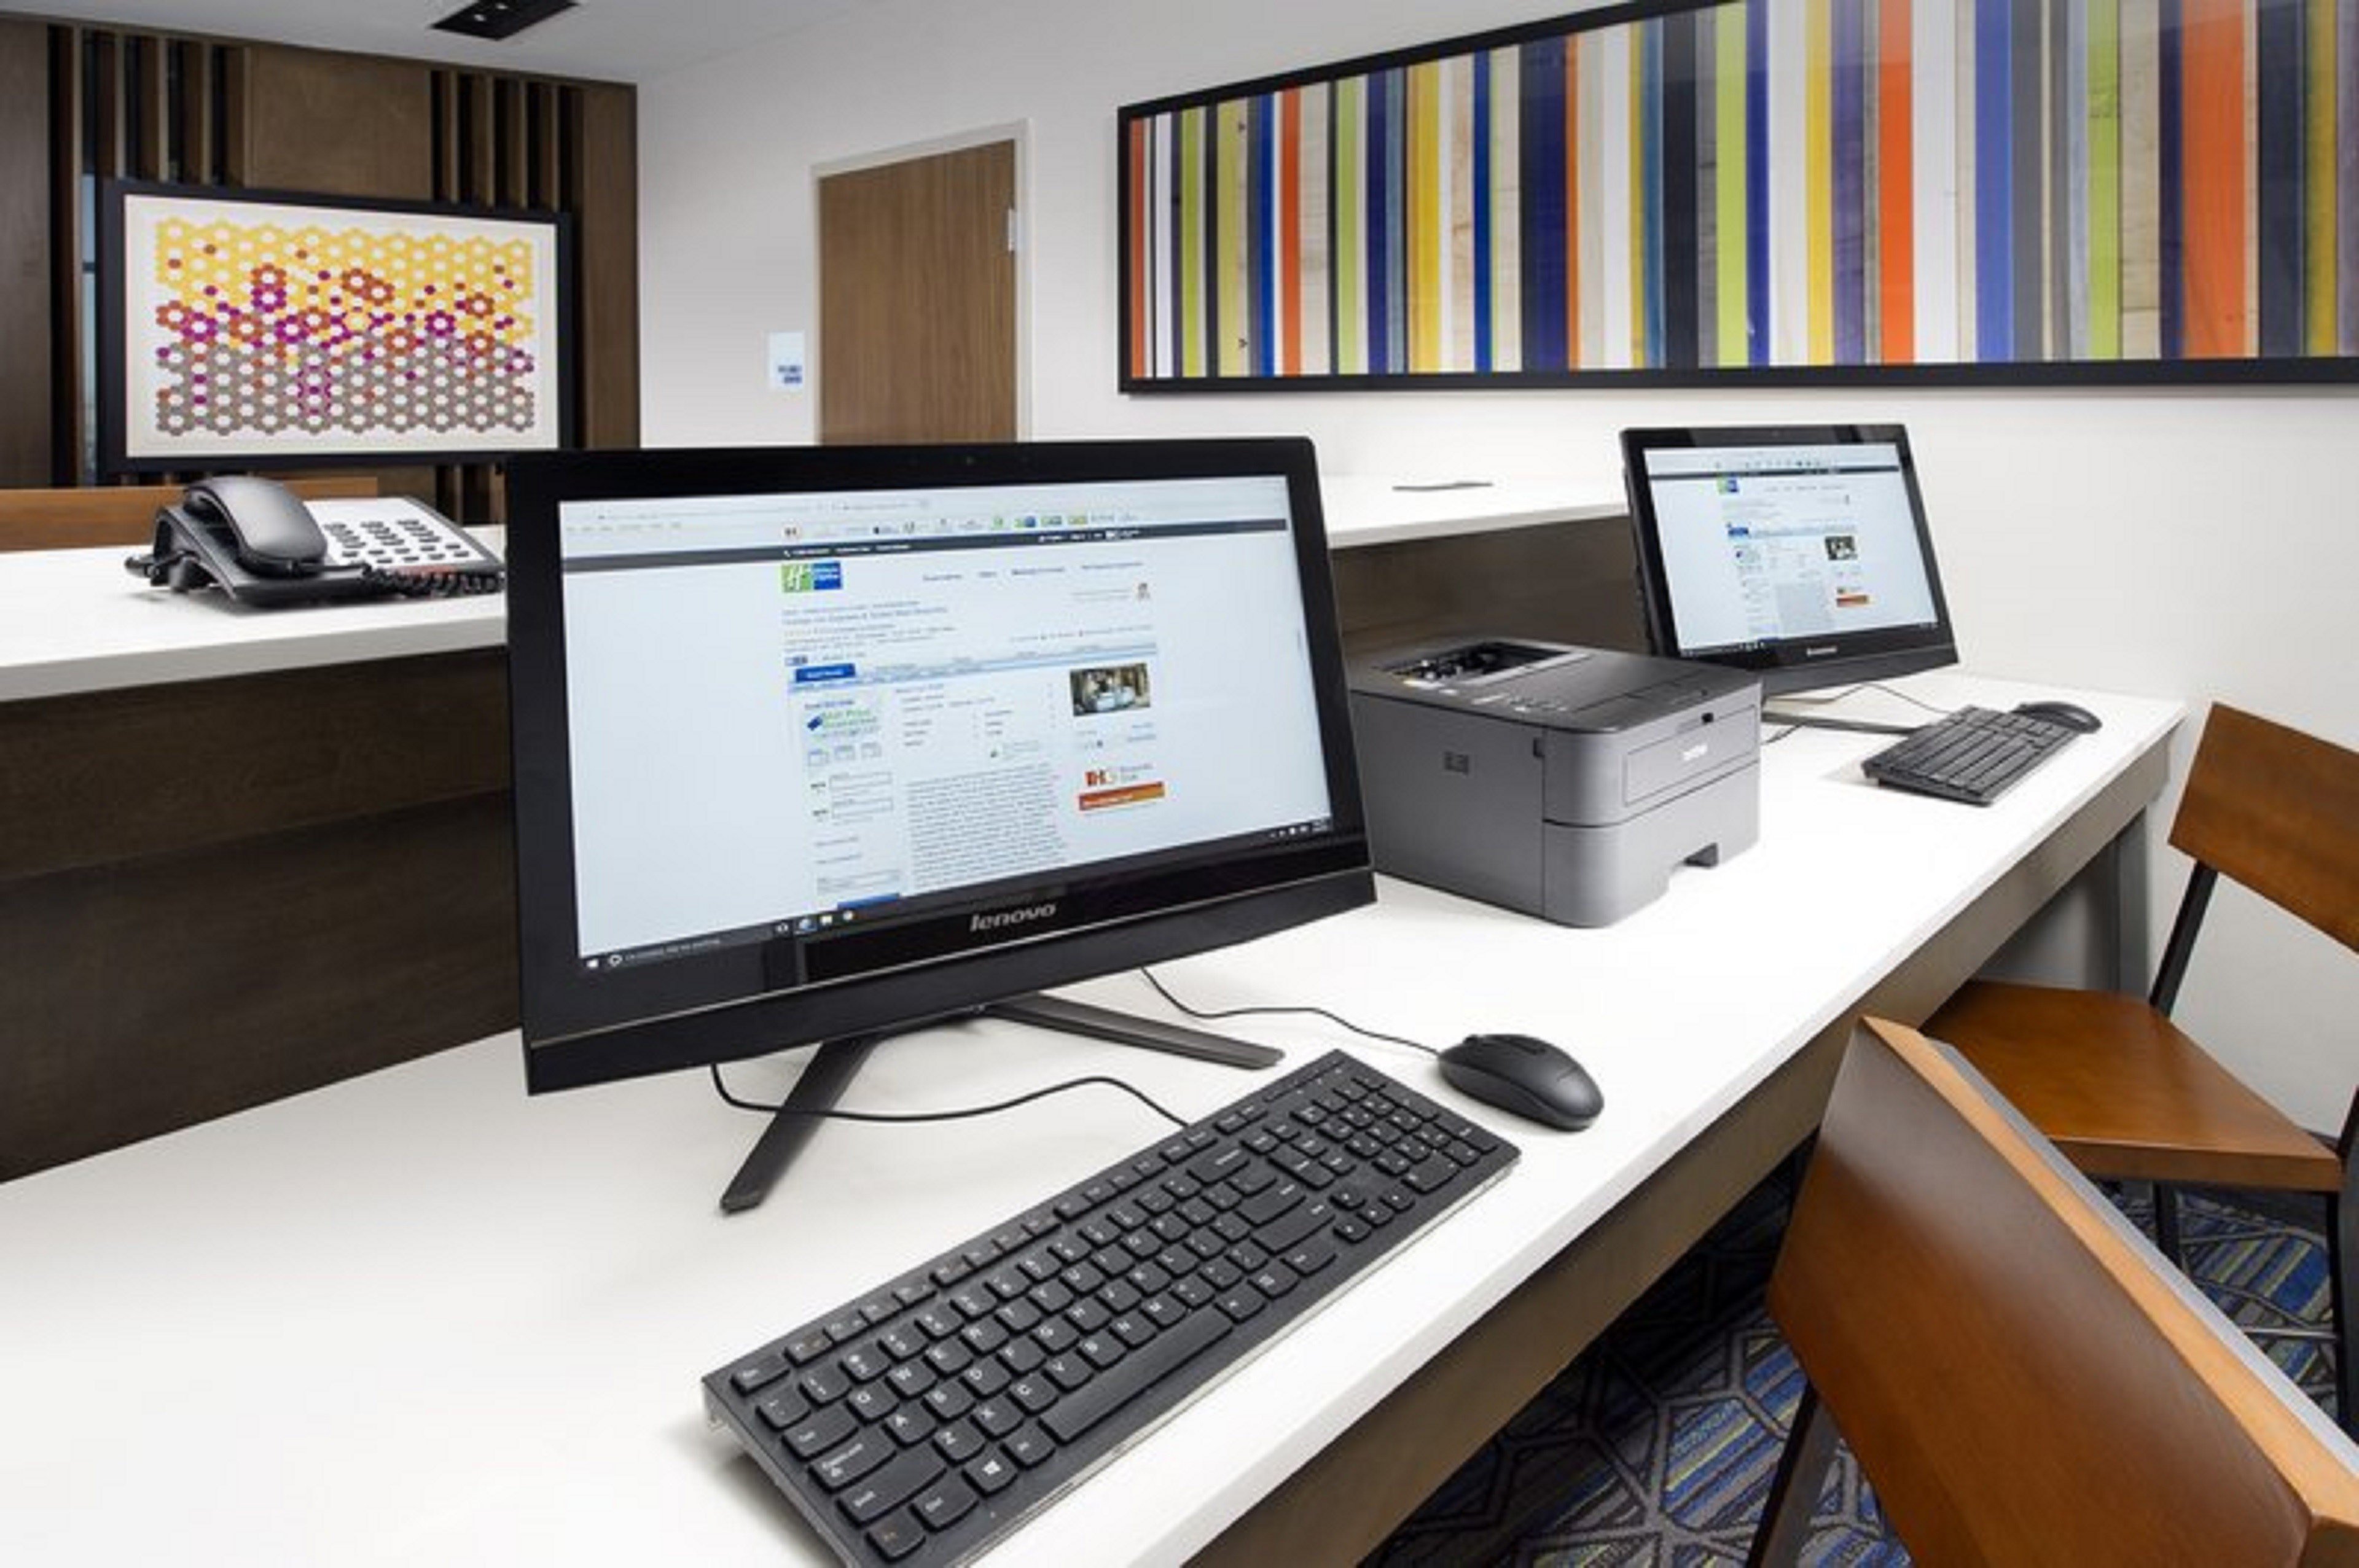 Relax and enjoy our business center with brand new desktops